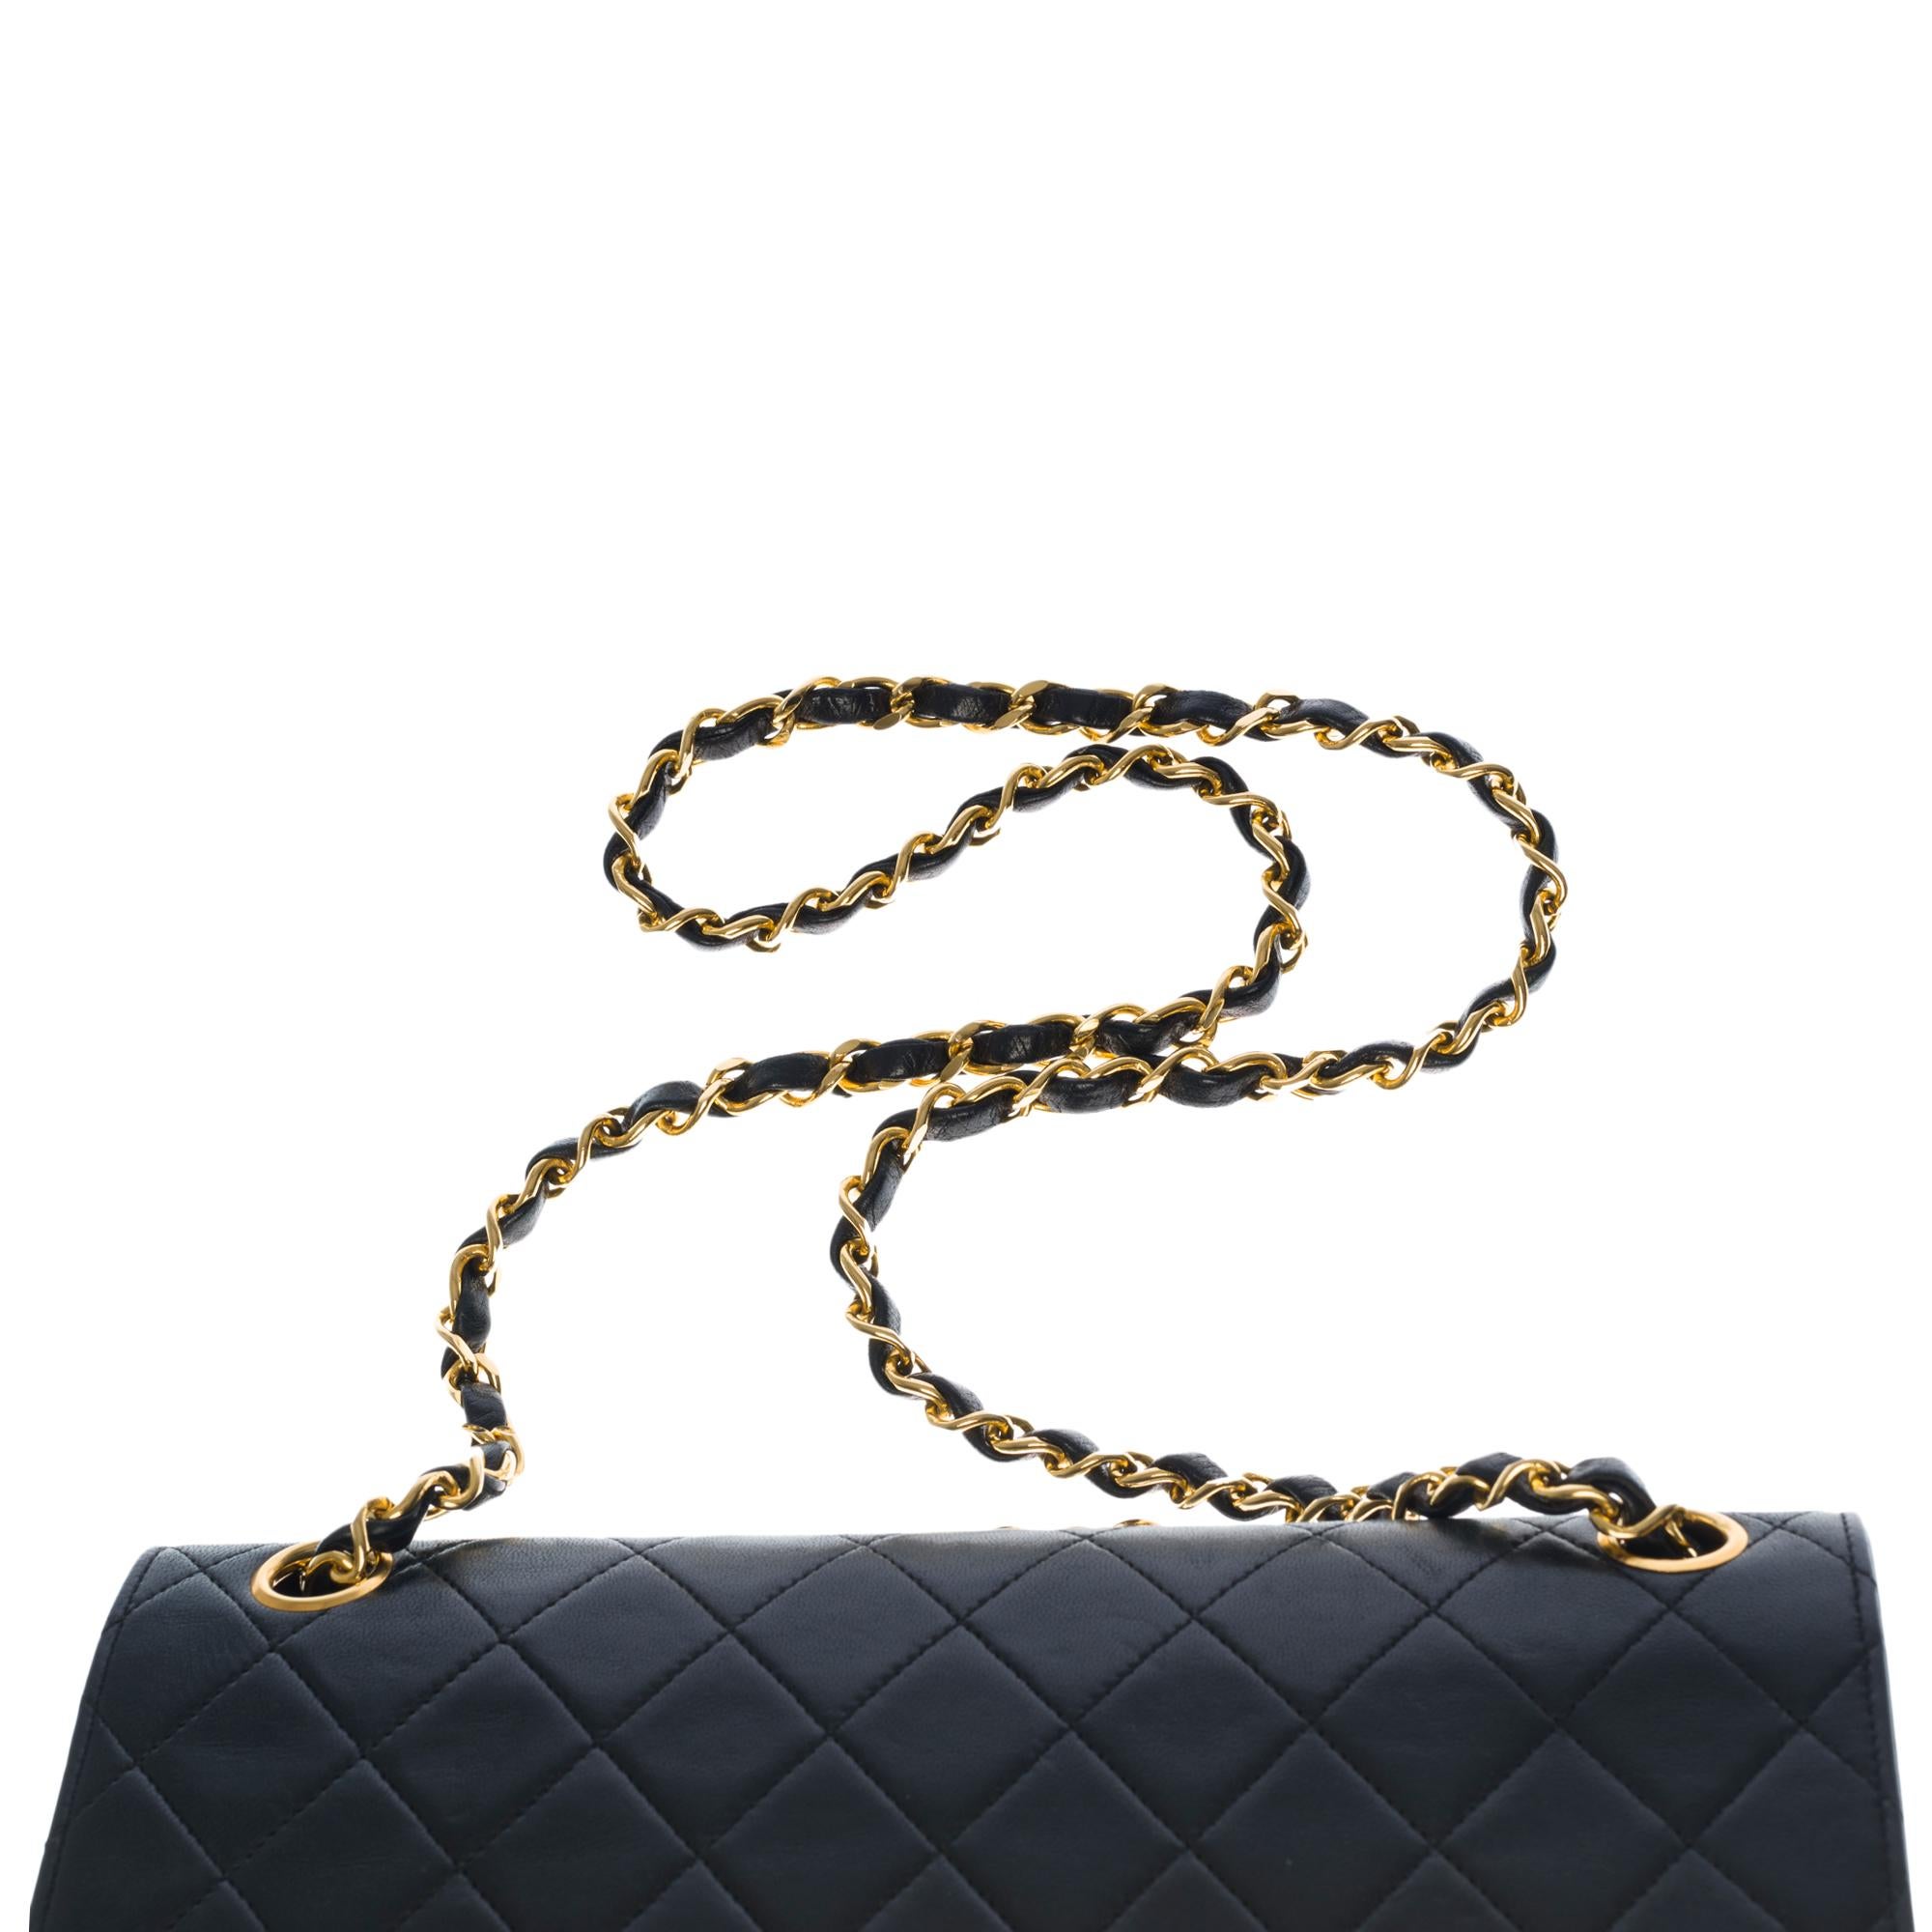 Chanel Timeless Medium double flap shoulder bag in black quilted lambskin, GHW 3